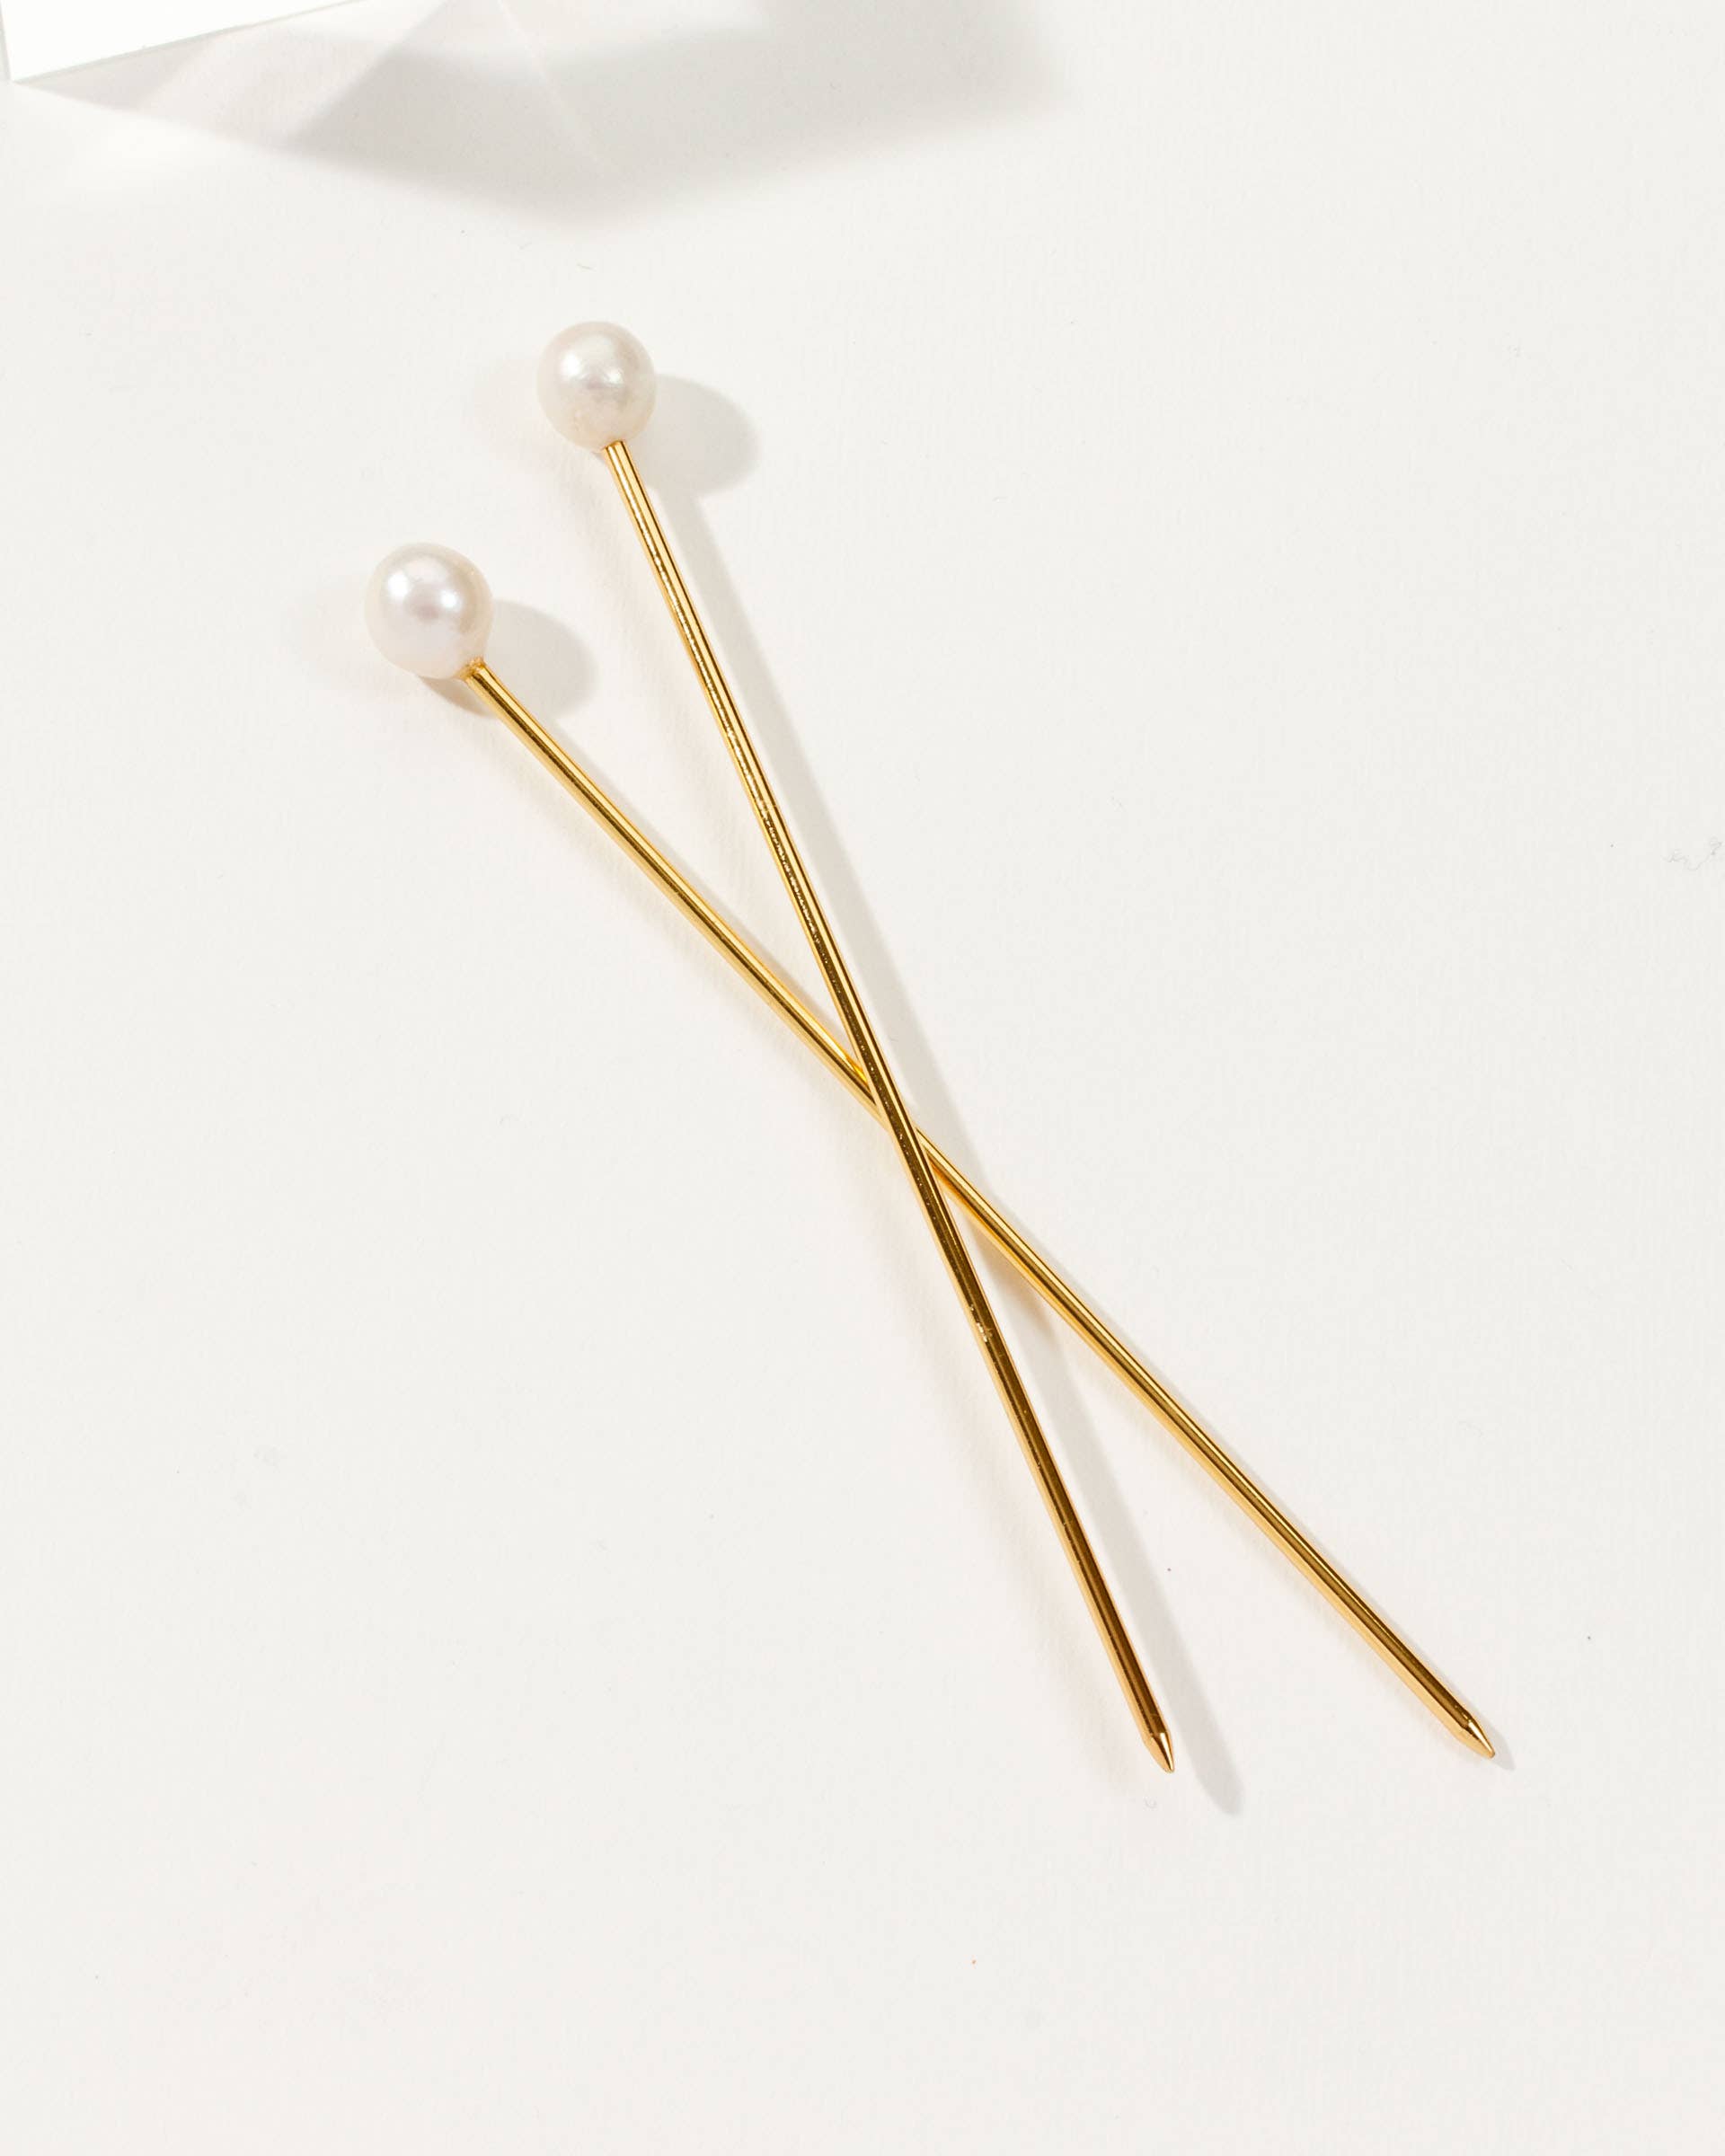 Ebb and Flow Pearl Hair Pin Jewelry